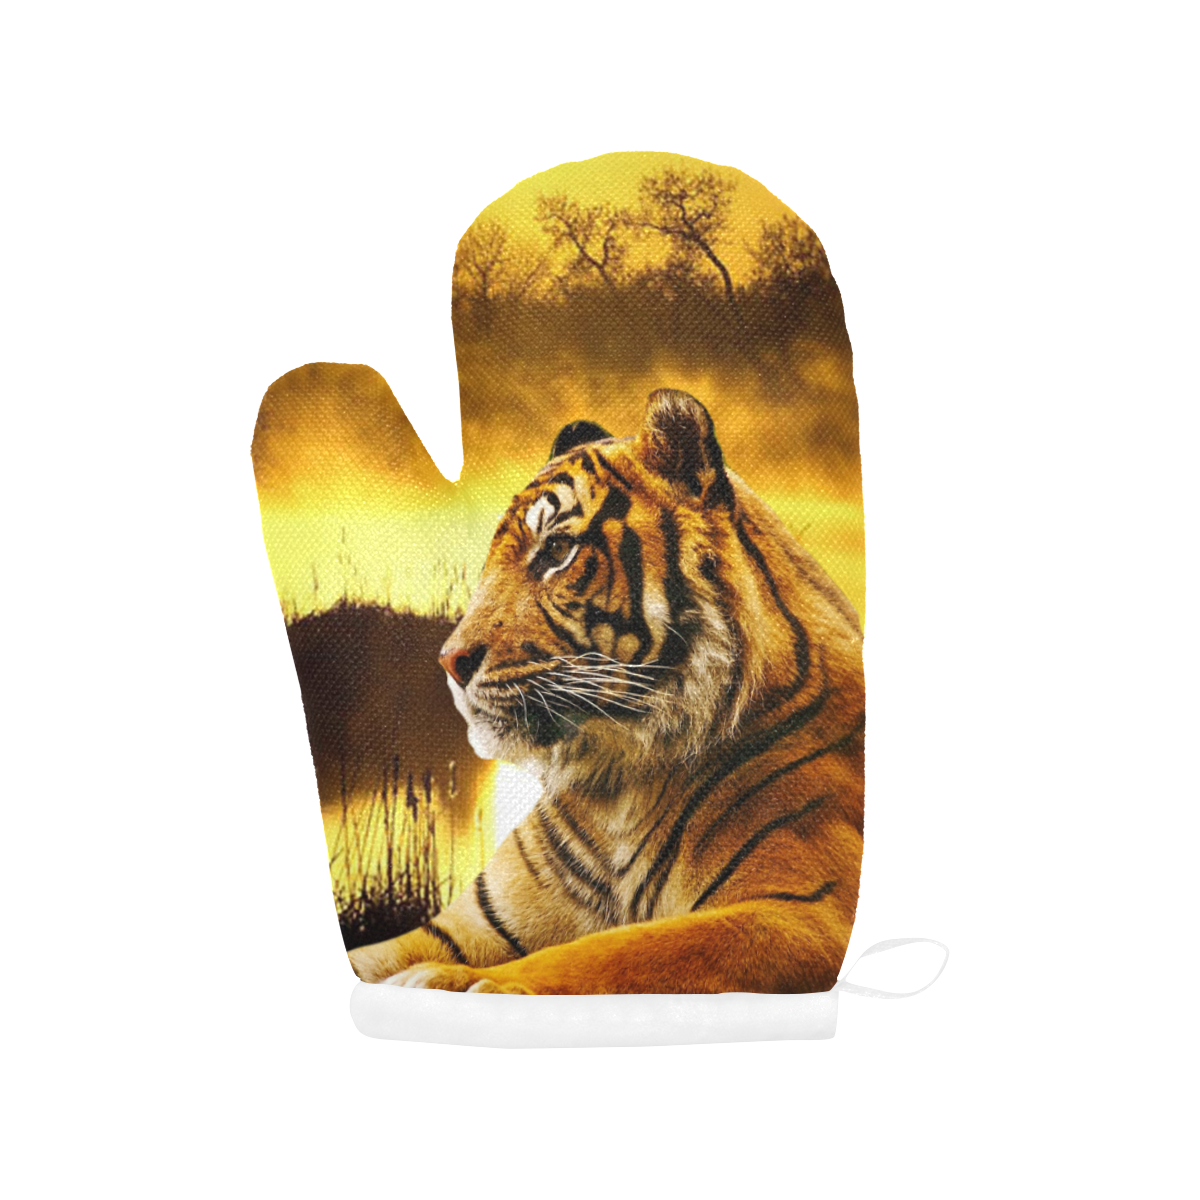 Tiger and Sunset Oven Mitt (Two Pieces)